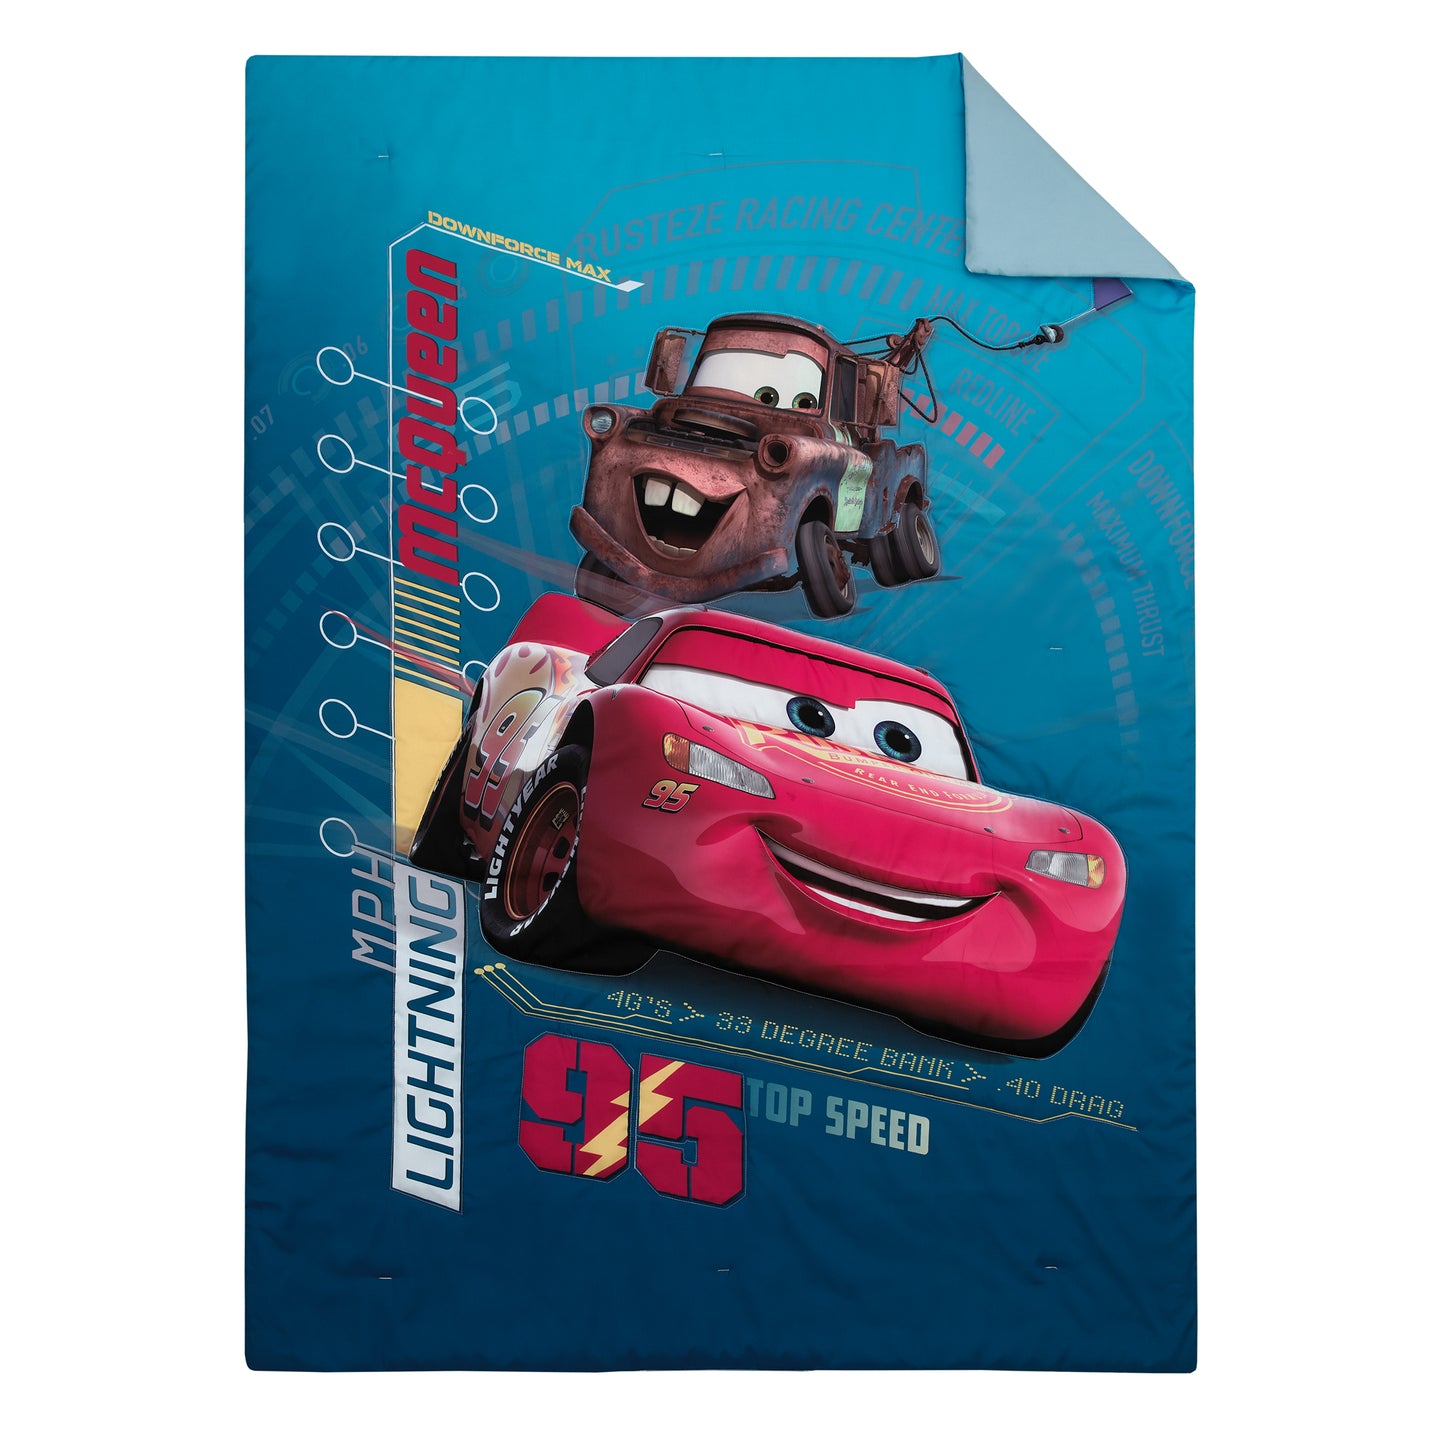 Disney Cars Piston Cup Circuit Blue, Red, and Yellow, Lightning McQueen and Mater 4 Piece Toddler Bed Set - Comforter, Fitted Bottom Sheet, Flat Top Sheet, and Reversible Pillowcase